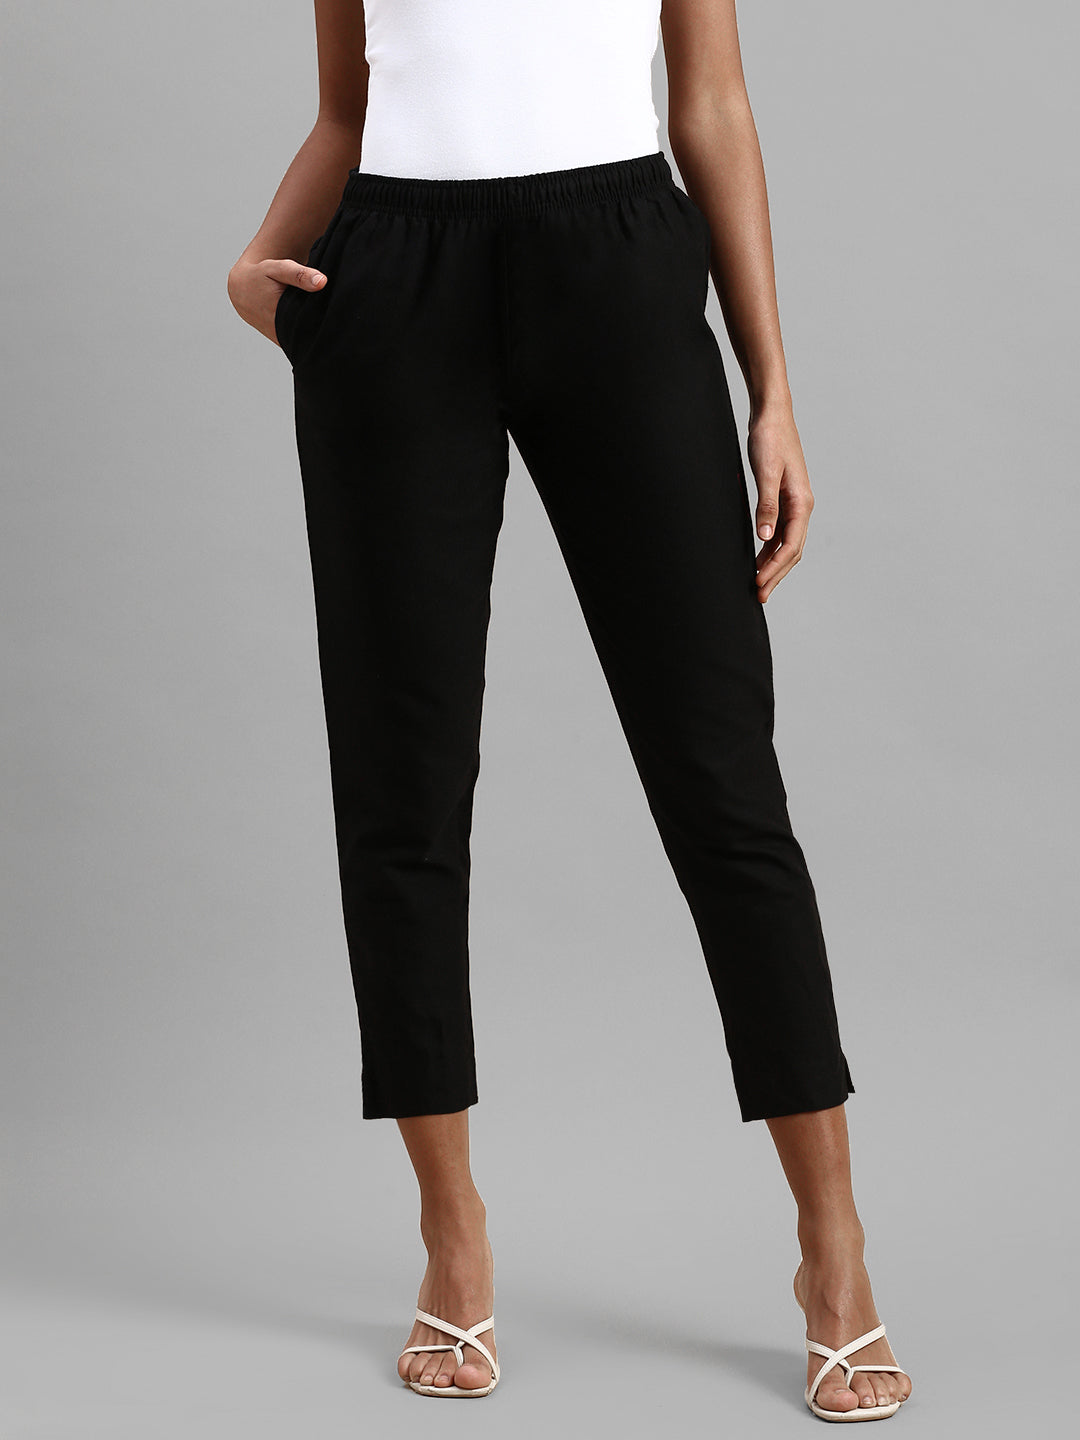 Ponte Stovepipe Pant in Black with Extended Tab Waistband and Zipper – KAL  RIEMAN